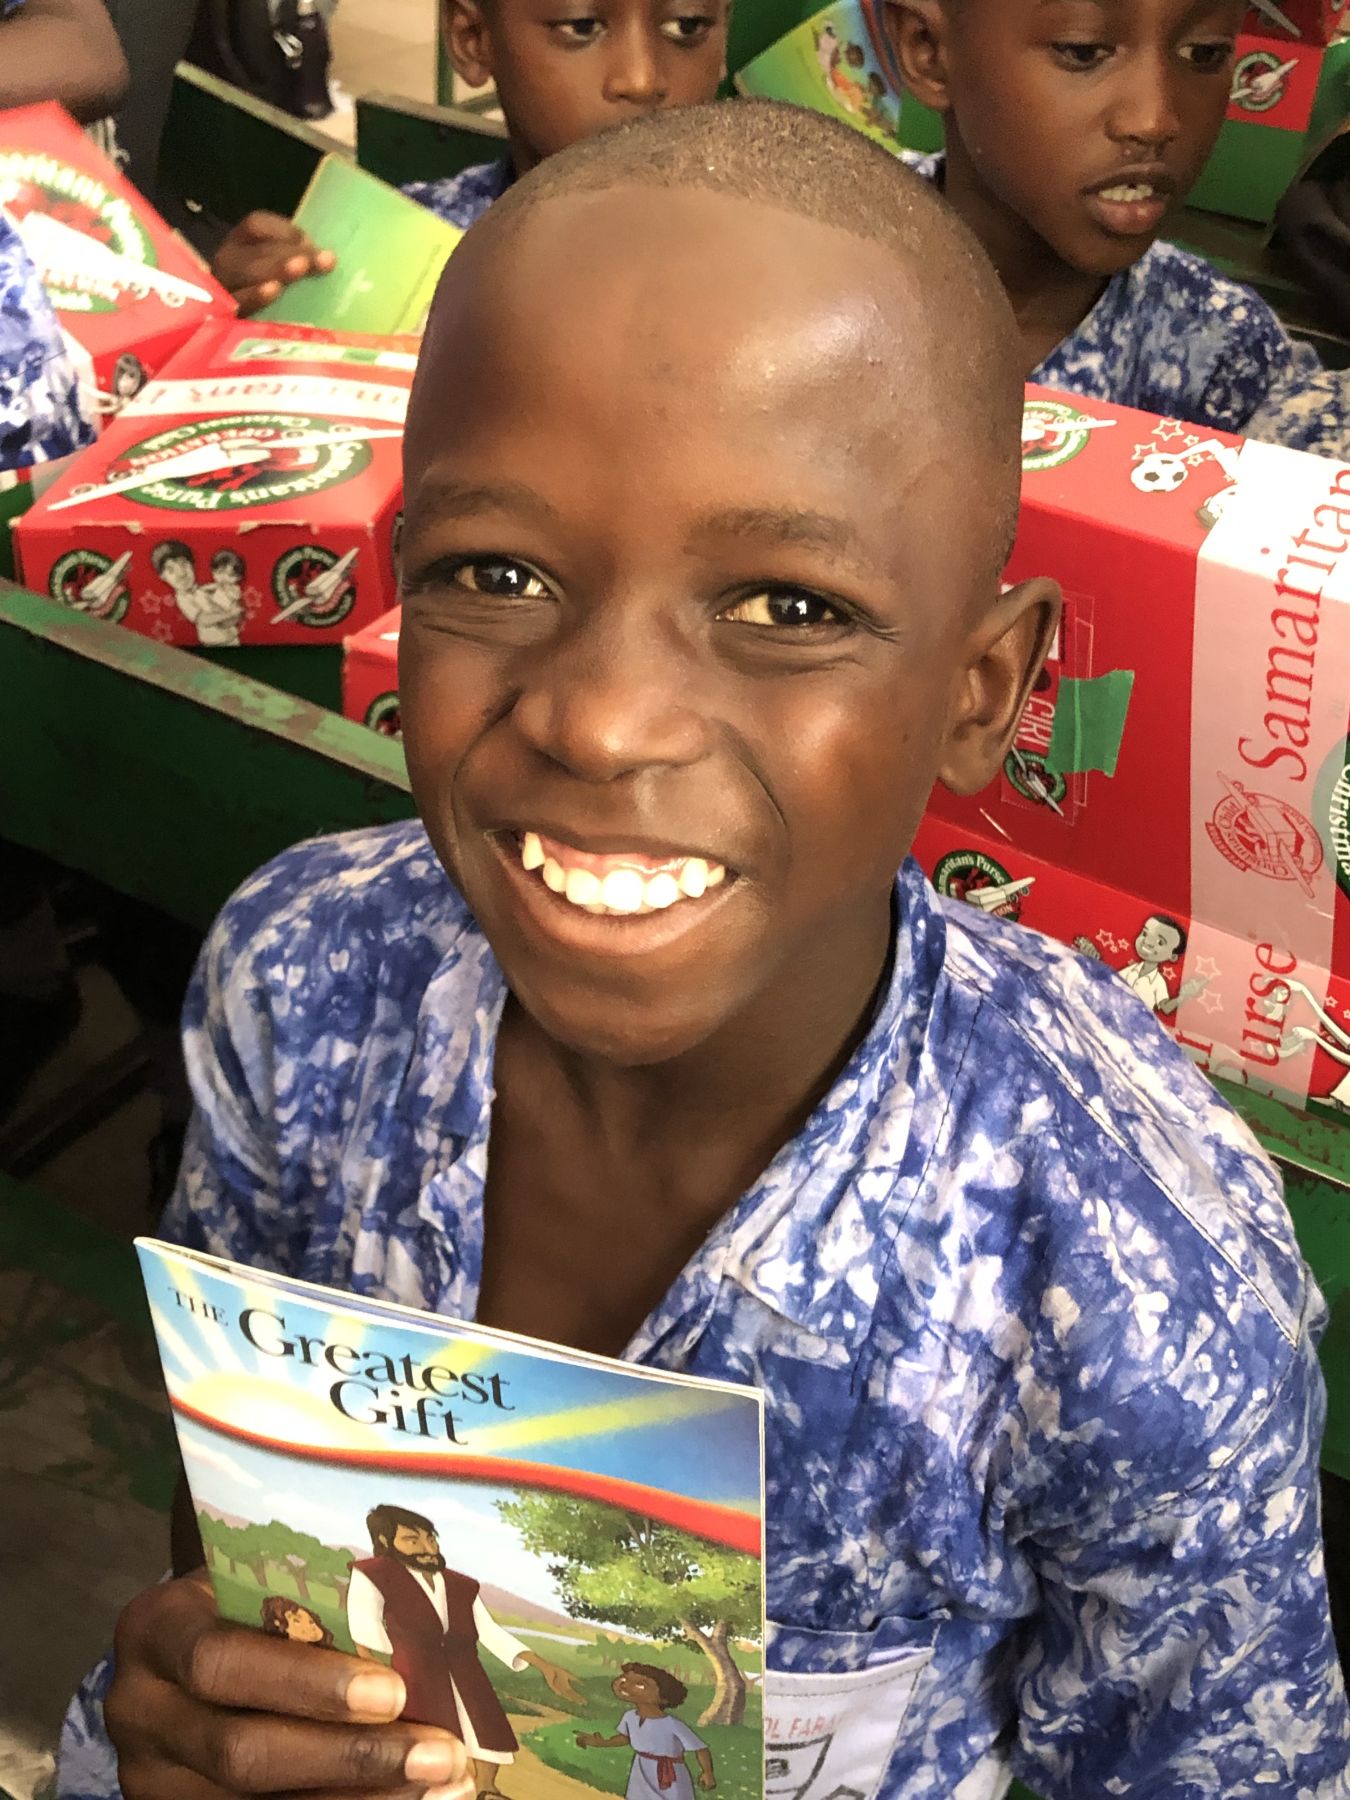 The Greatest Gift booklet, delivered alongside shoebox gifts, reminds children how much Jesus loves them! It's often used as a tool to help kids share the Good News with their friends and families.